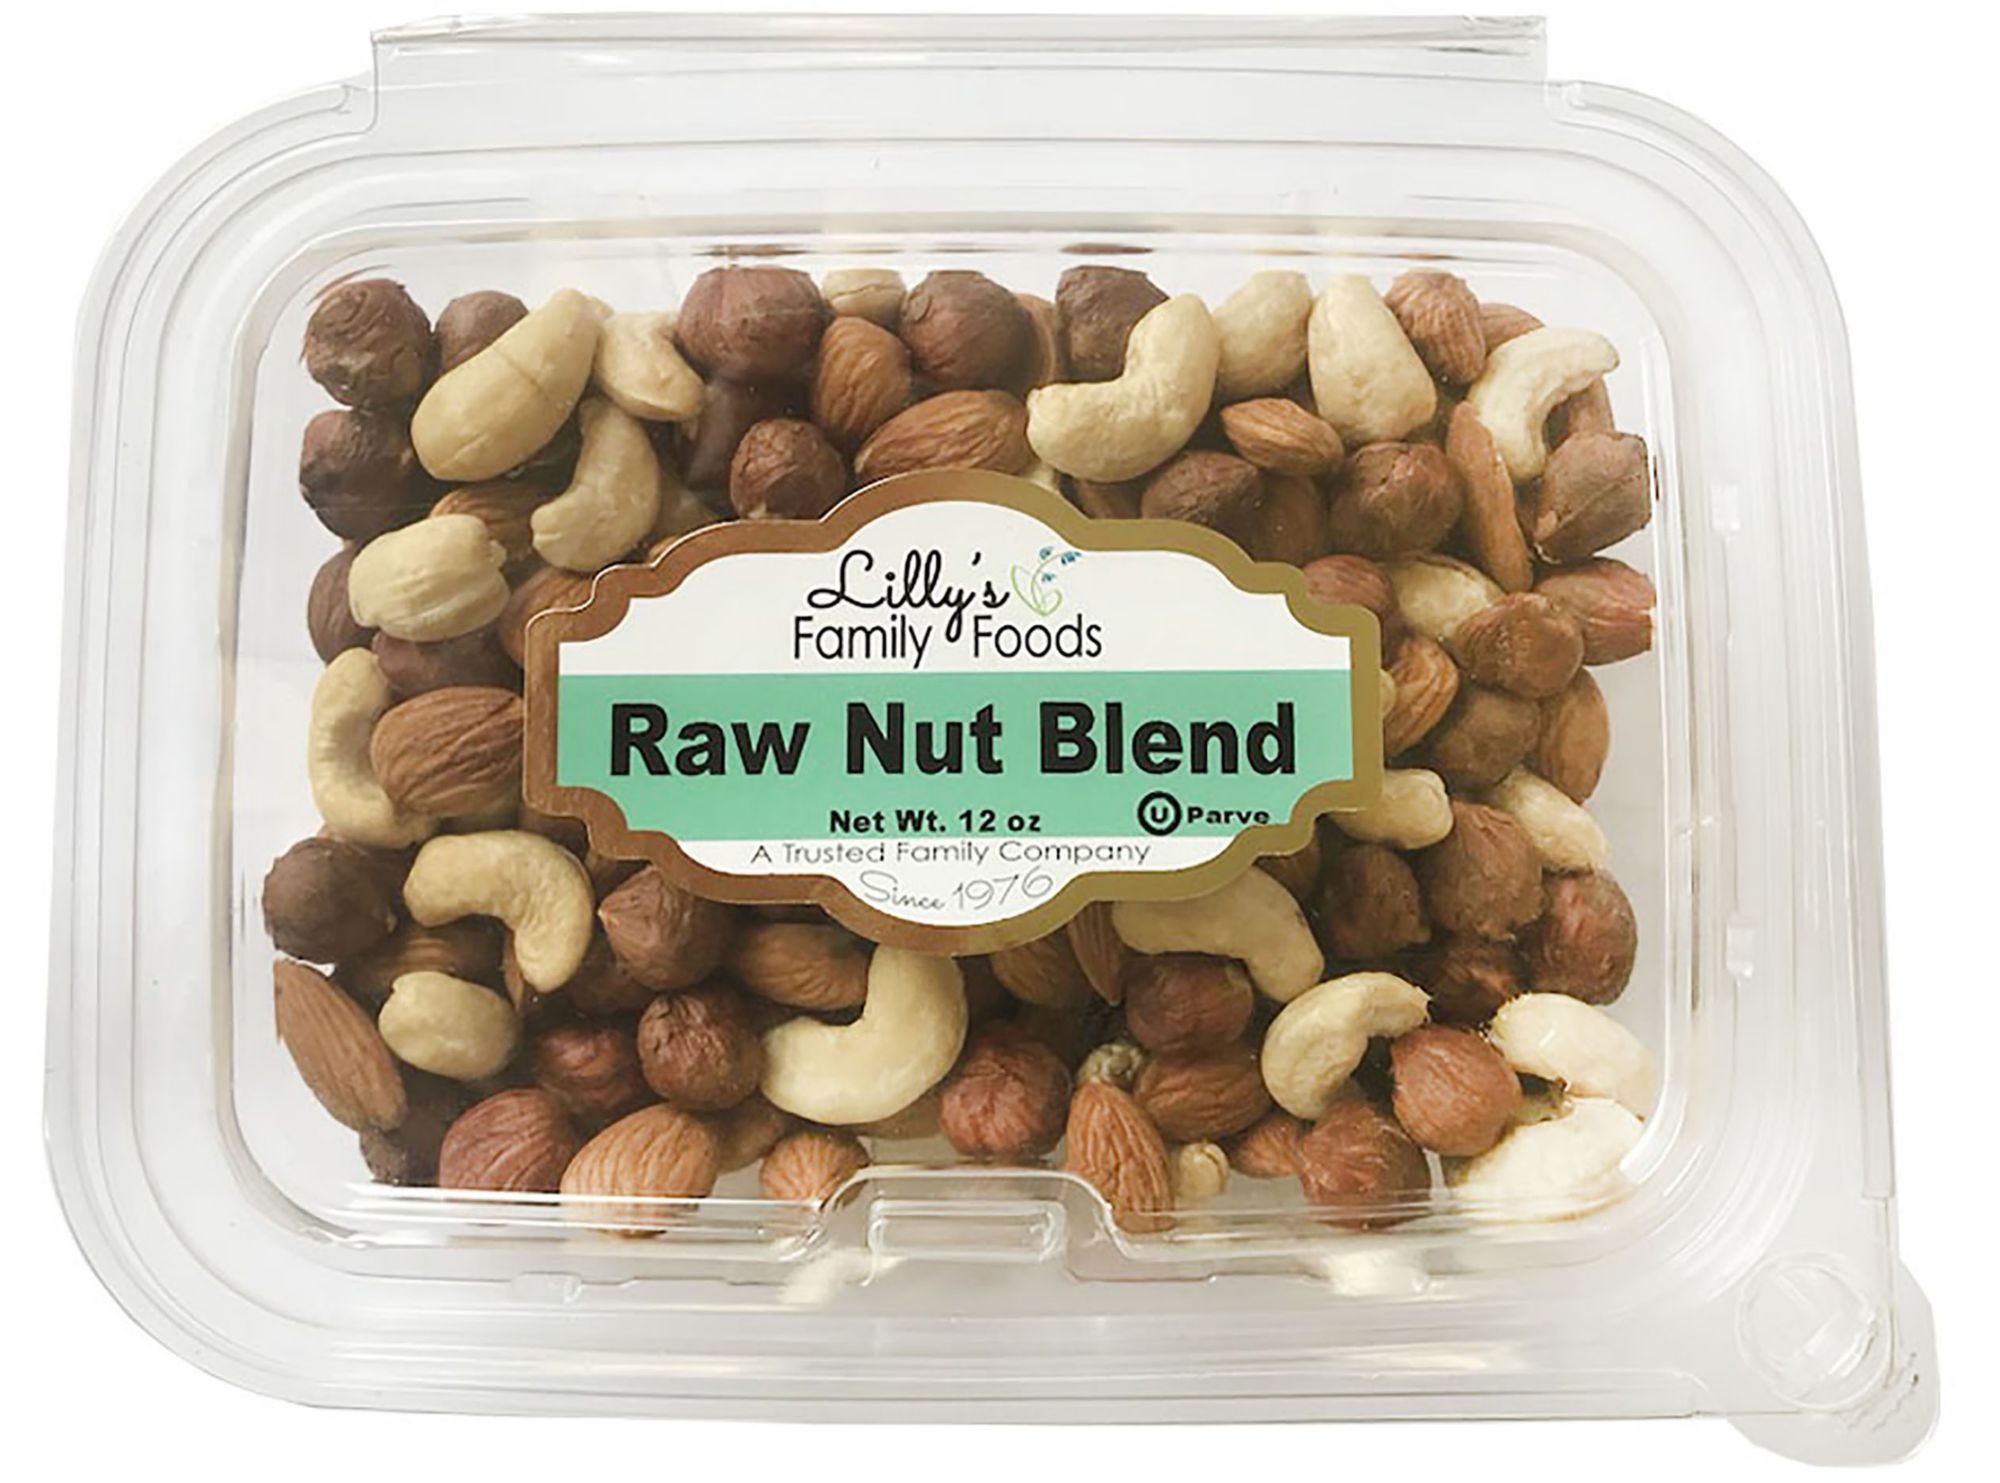 Lilly's Family Foods Raw Nut Blend, 12 oz.